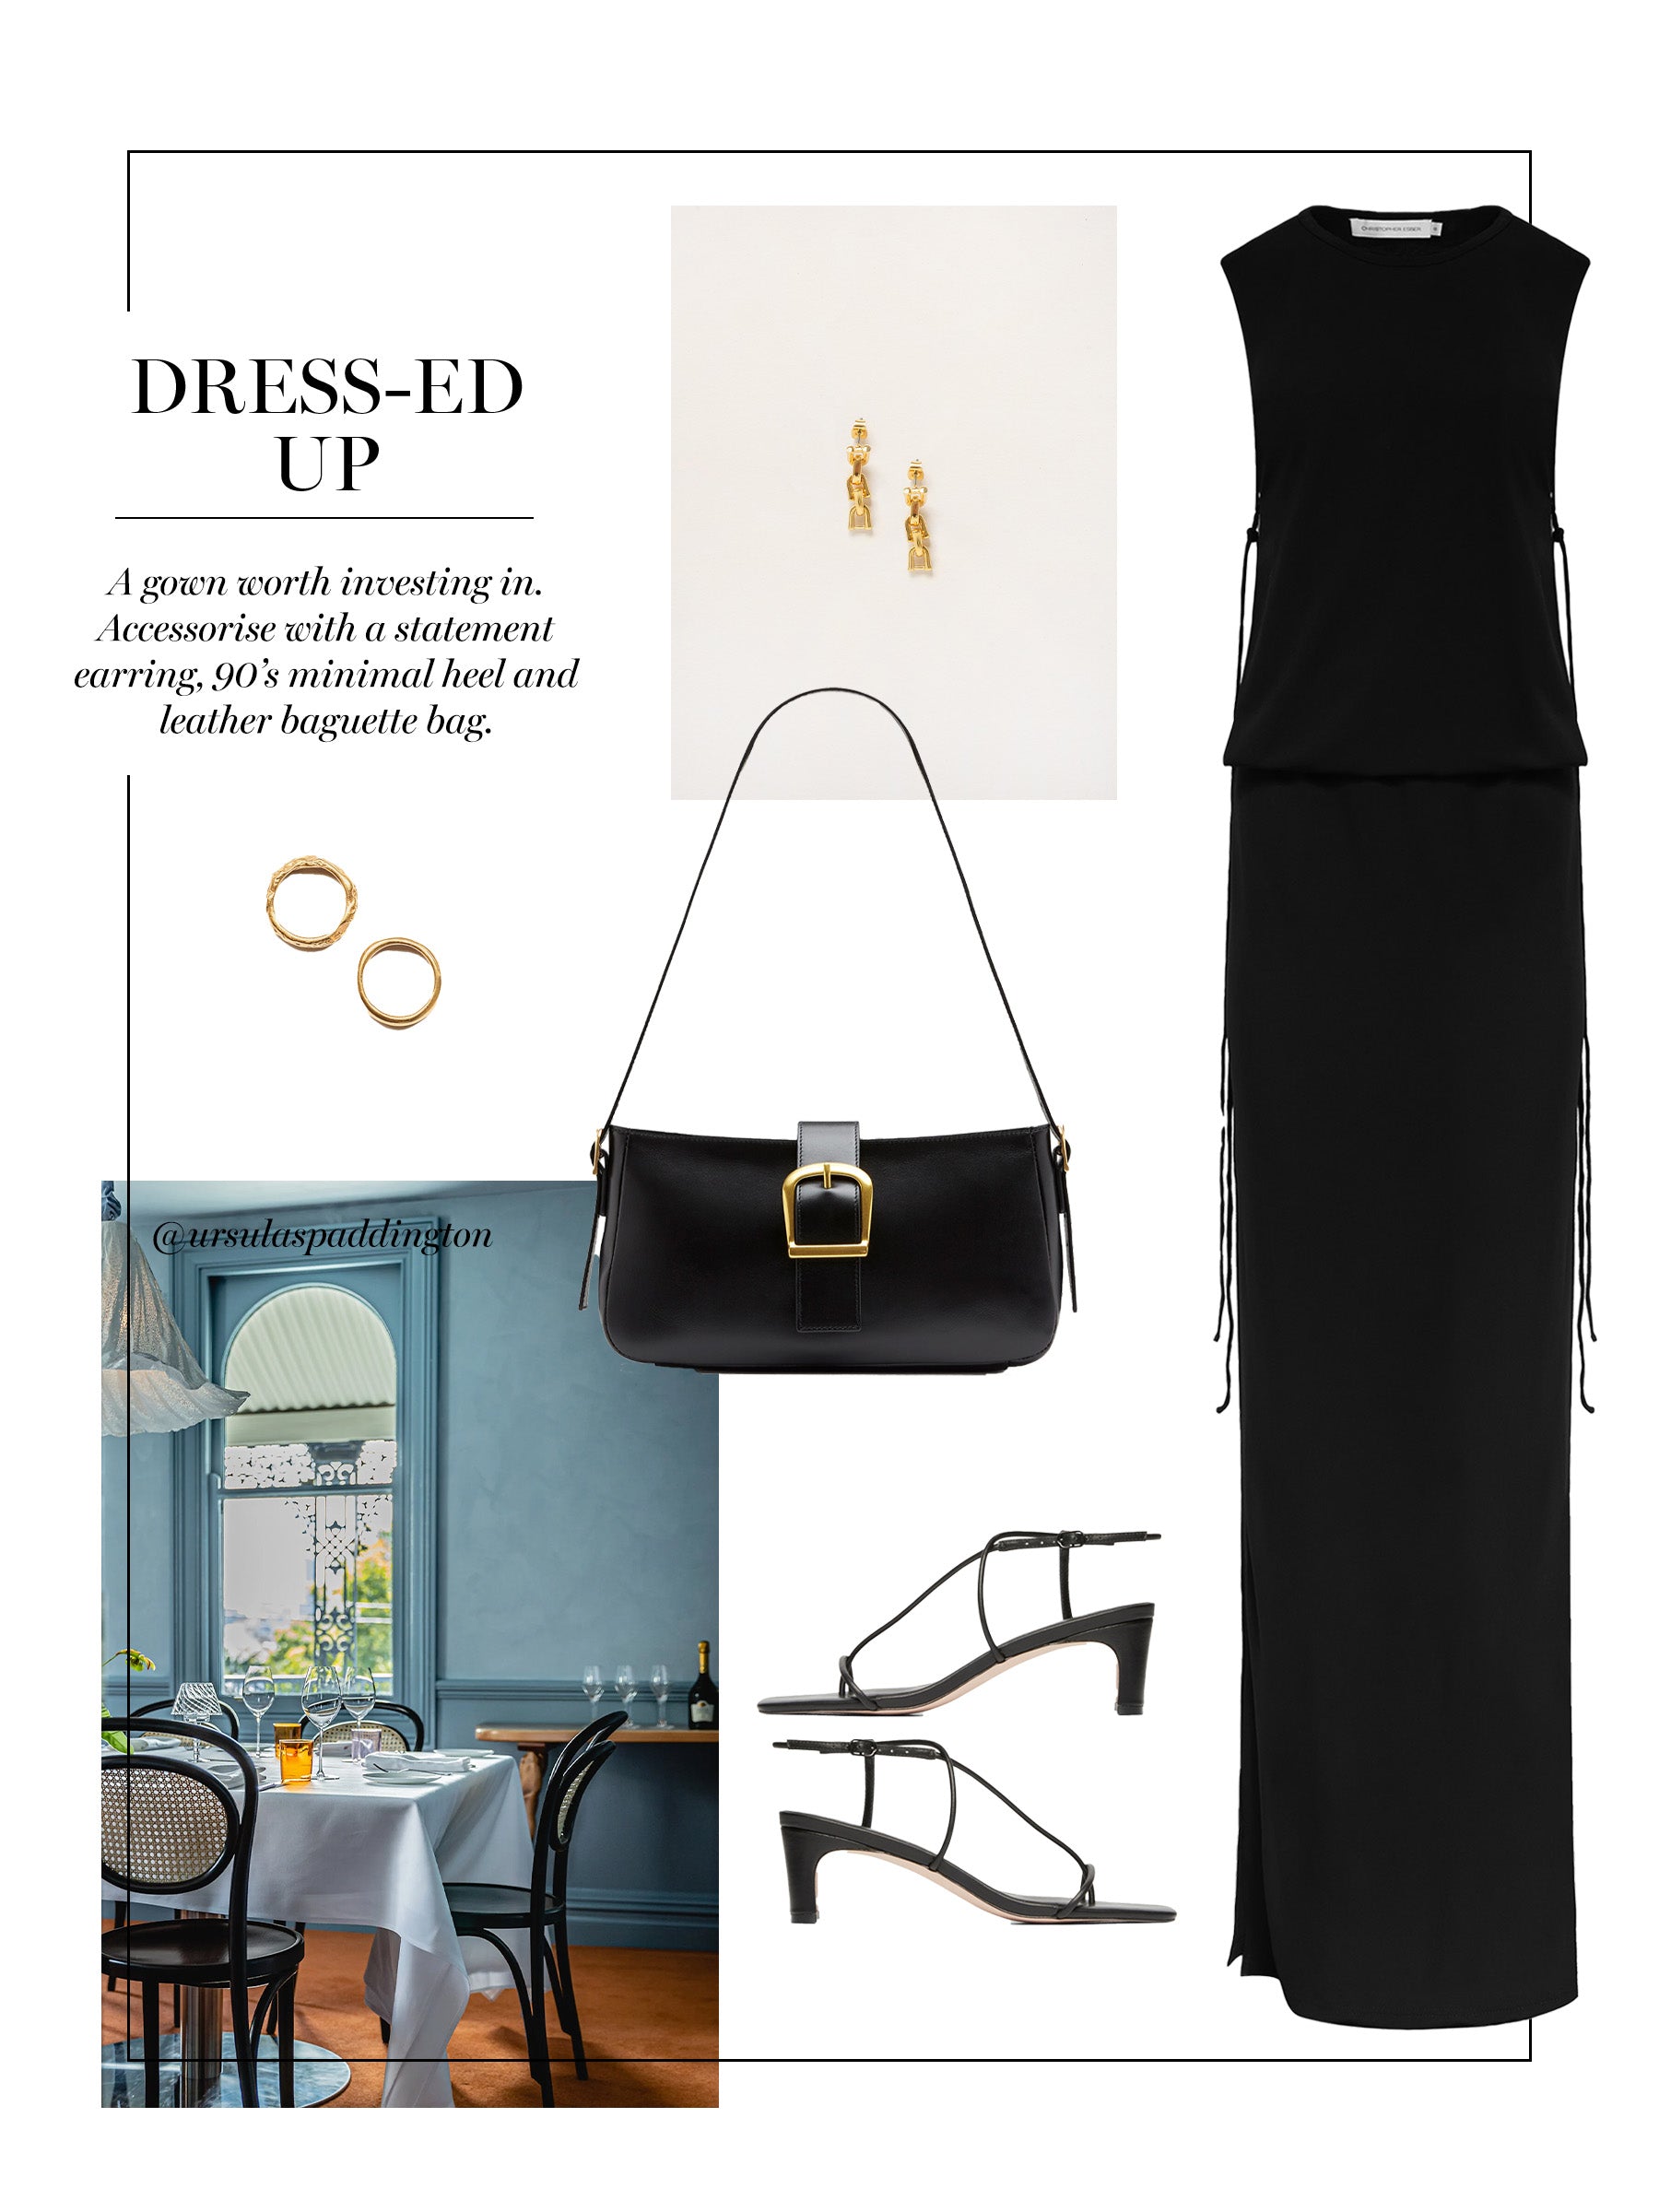 Statement black dress with black heels and gold accessories